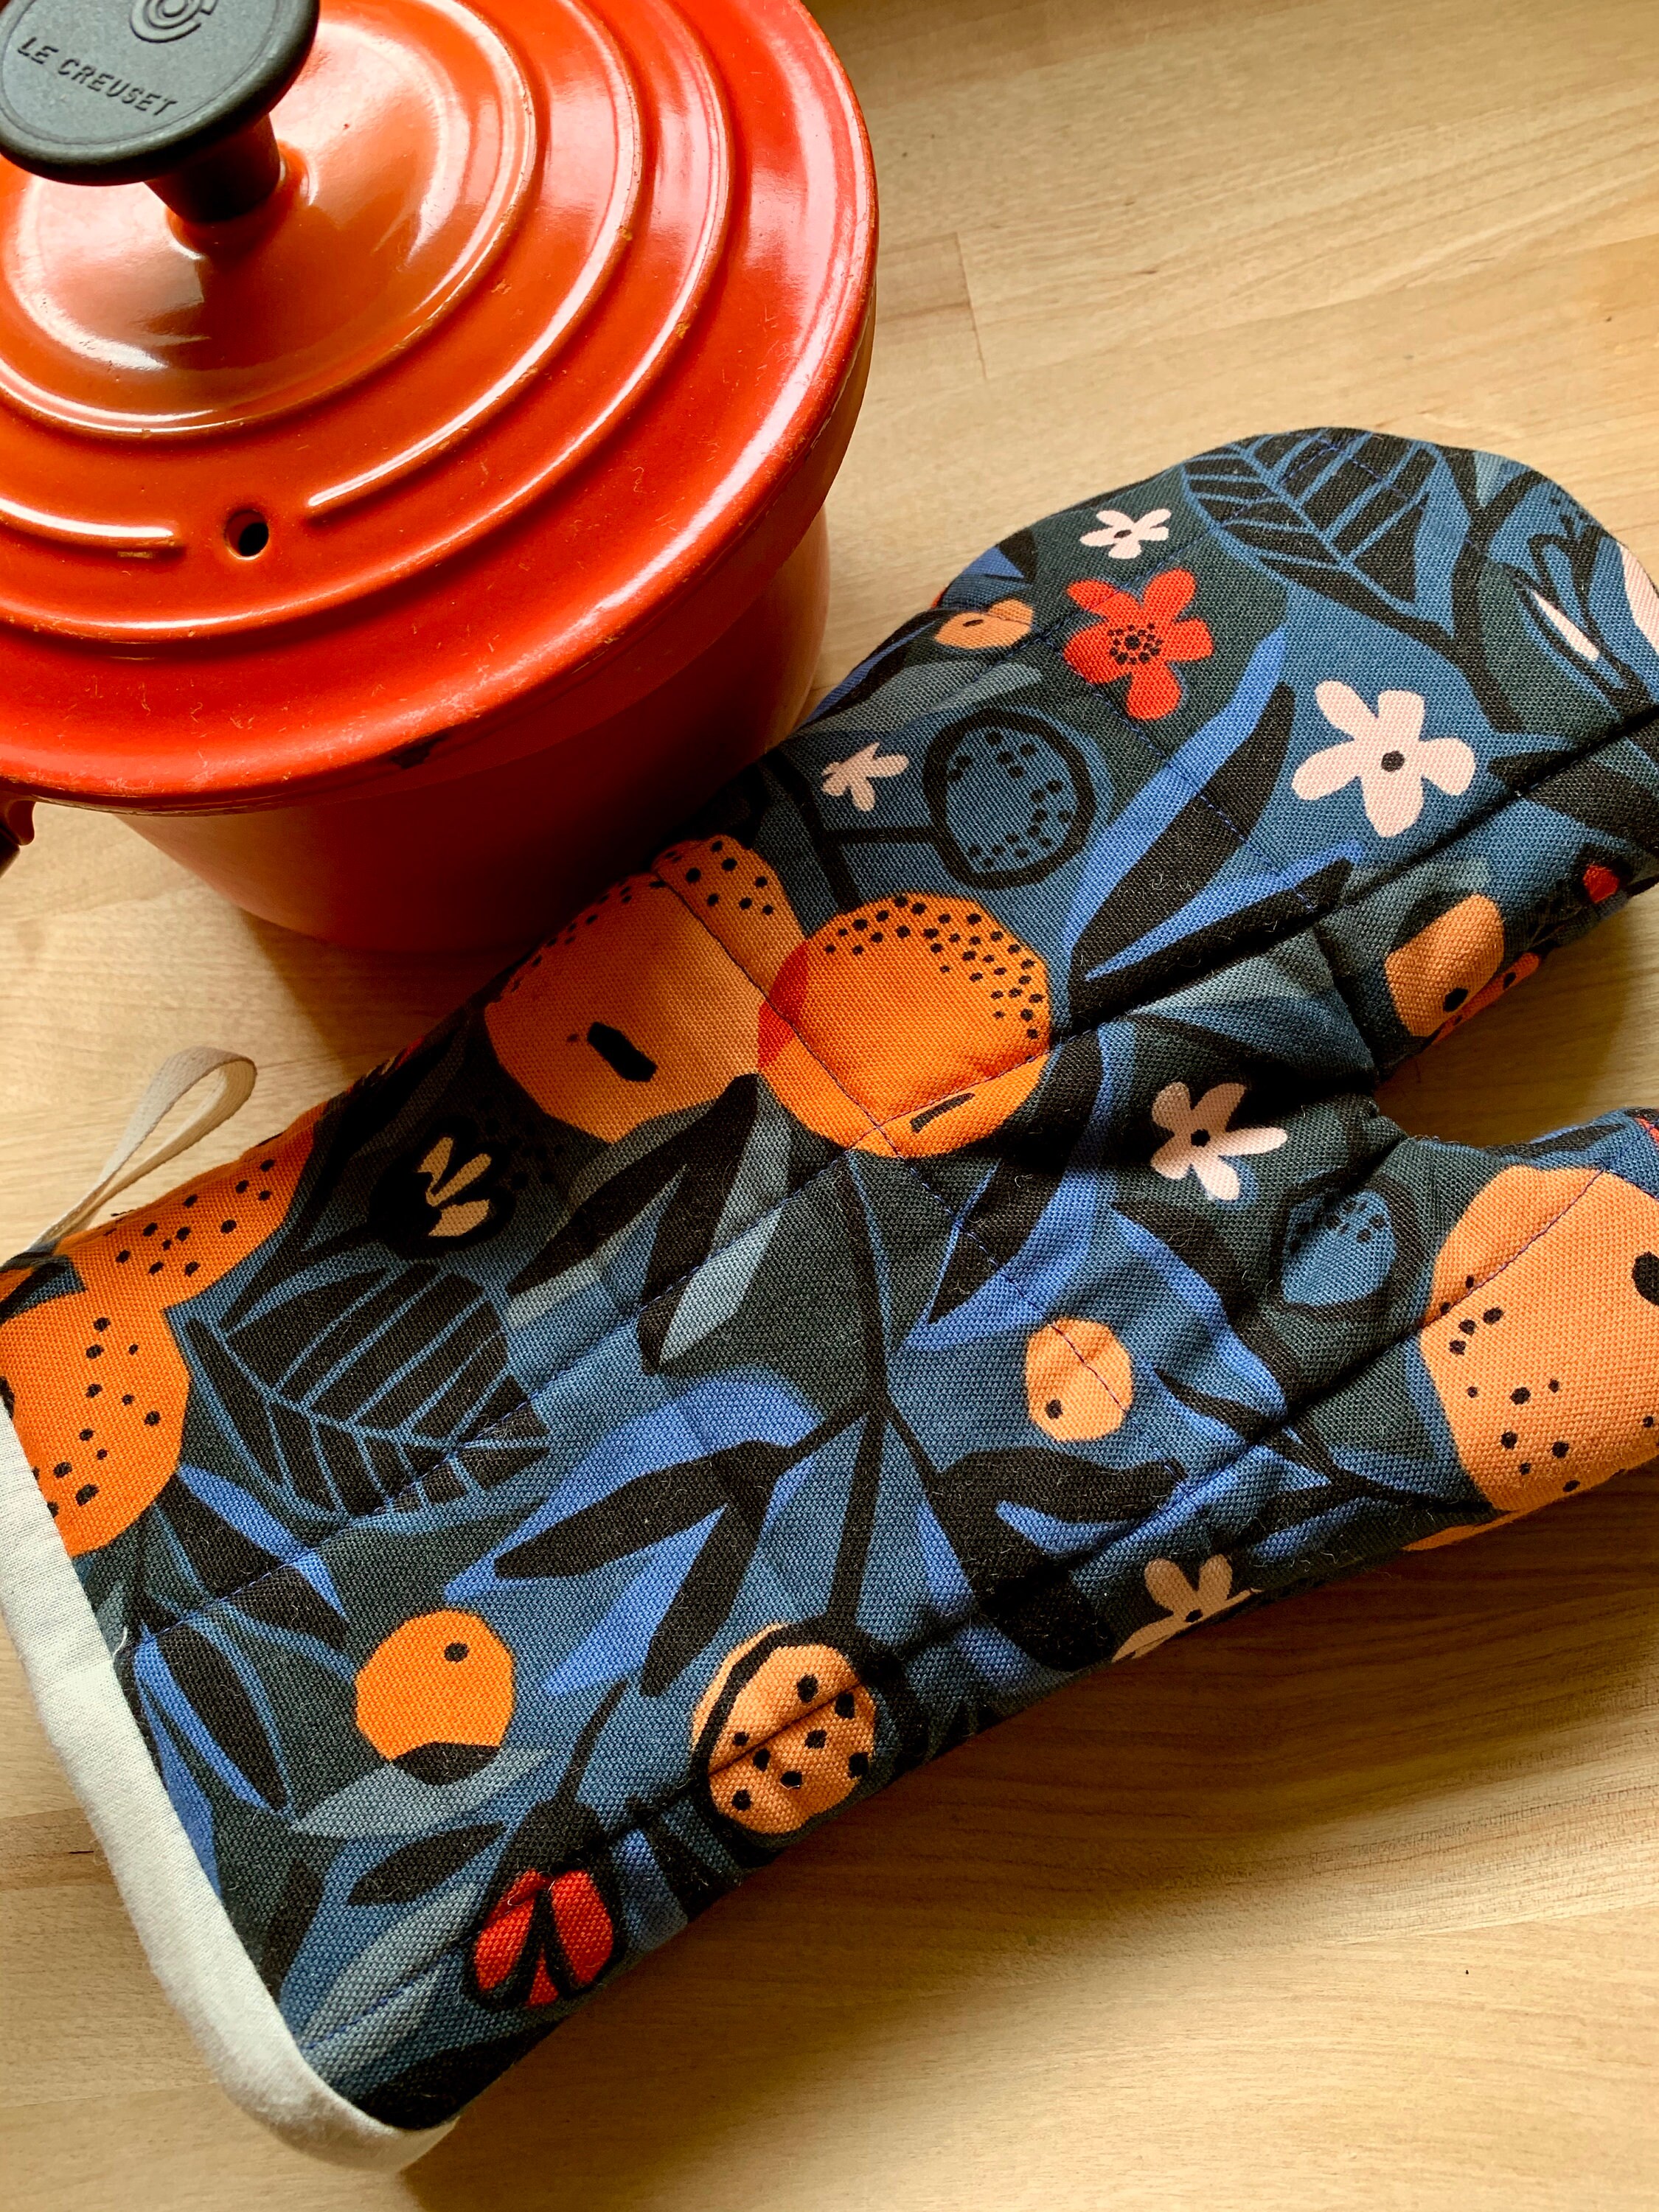 Le Creuset - Oven Gloves & Aprons